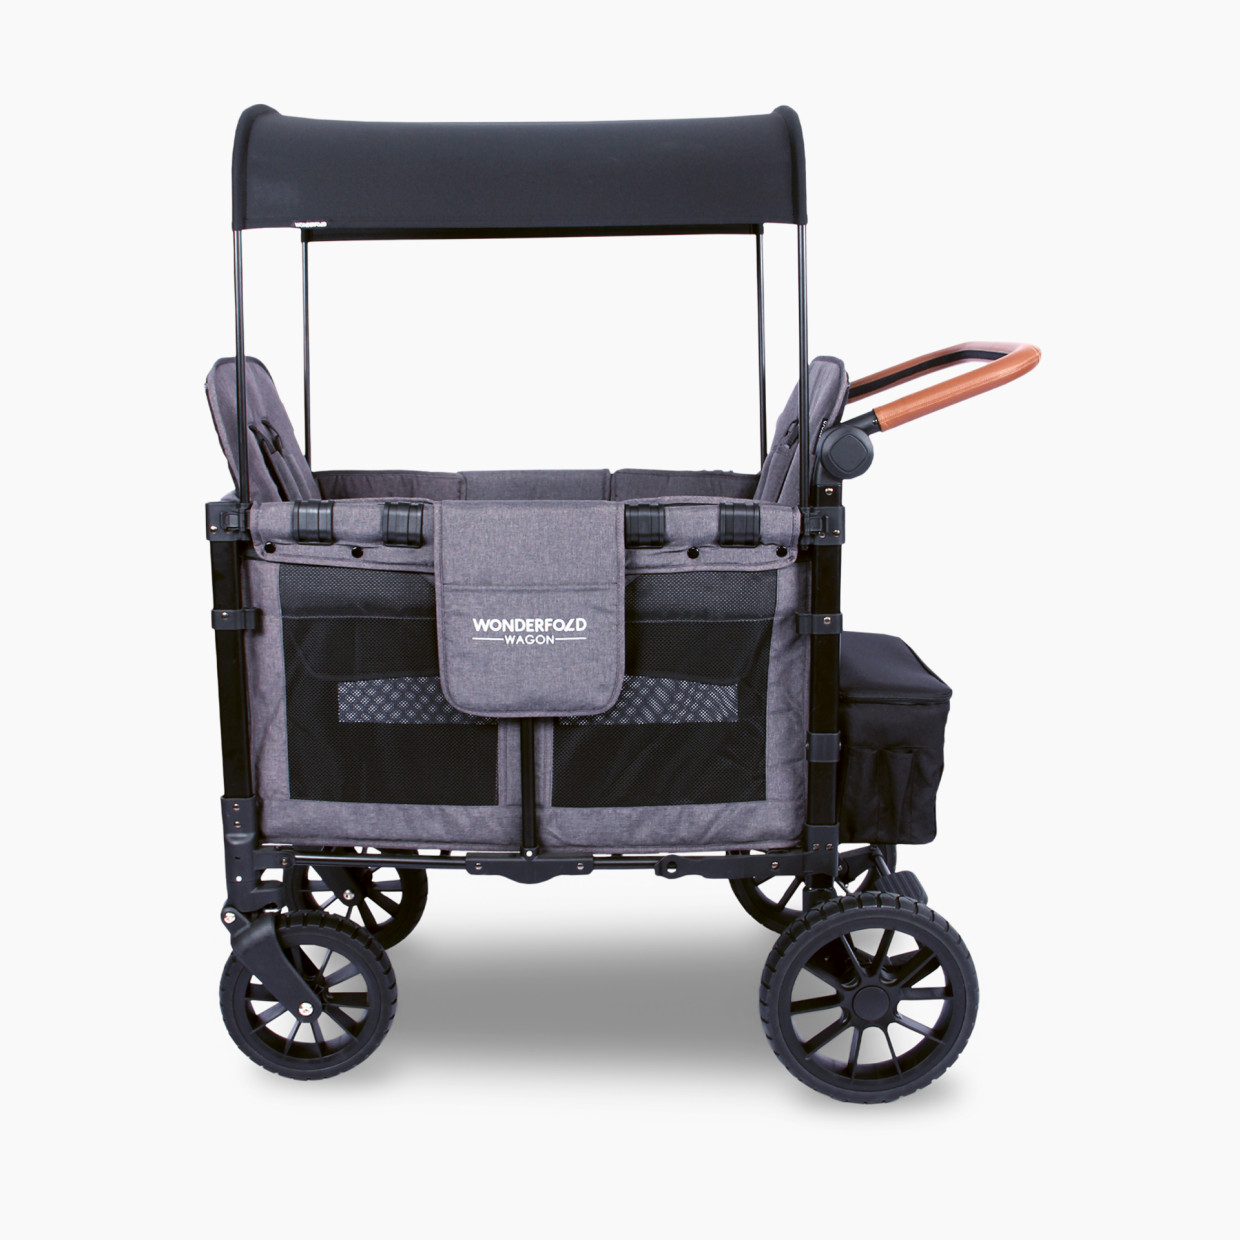 WonderFold Wagon W2 Luxe Double Stroller Wagon (2 Seater) - Charcoal Gray.